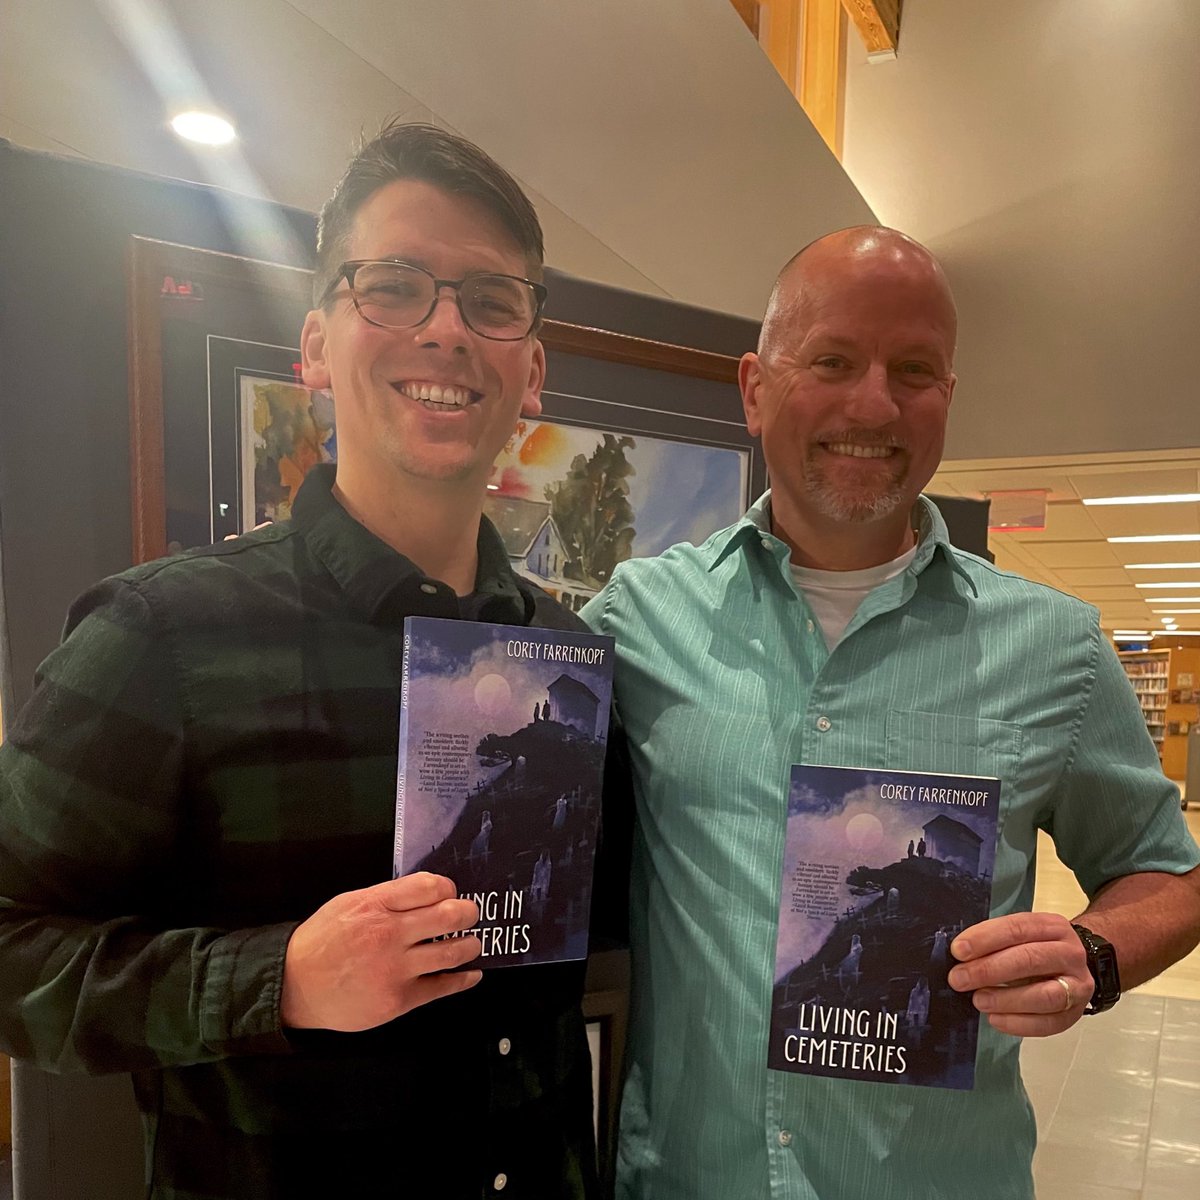 I had such an amazing time last night at the book launch event for @CoreyFarrenkopf debut novel LIVING IN CEMETERIES! Corey and his wife @ggriffiss are truly wonderful people and i just couldn’t be happier for them. And Corey’s book sounds fantastic! 😃 #MyNextRead